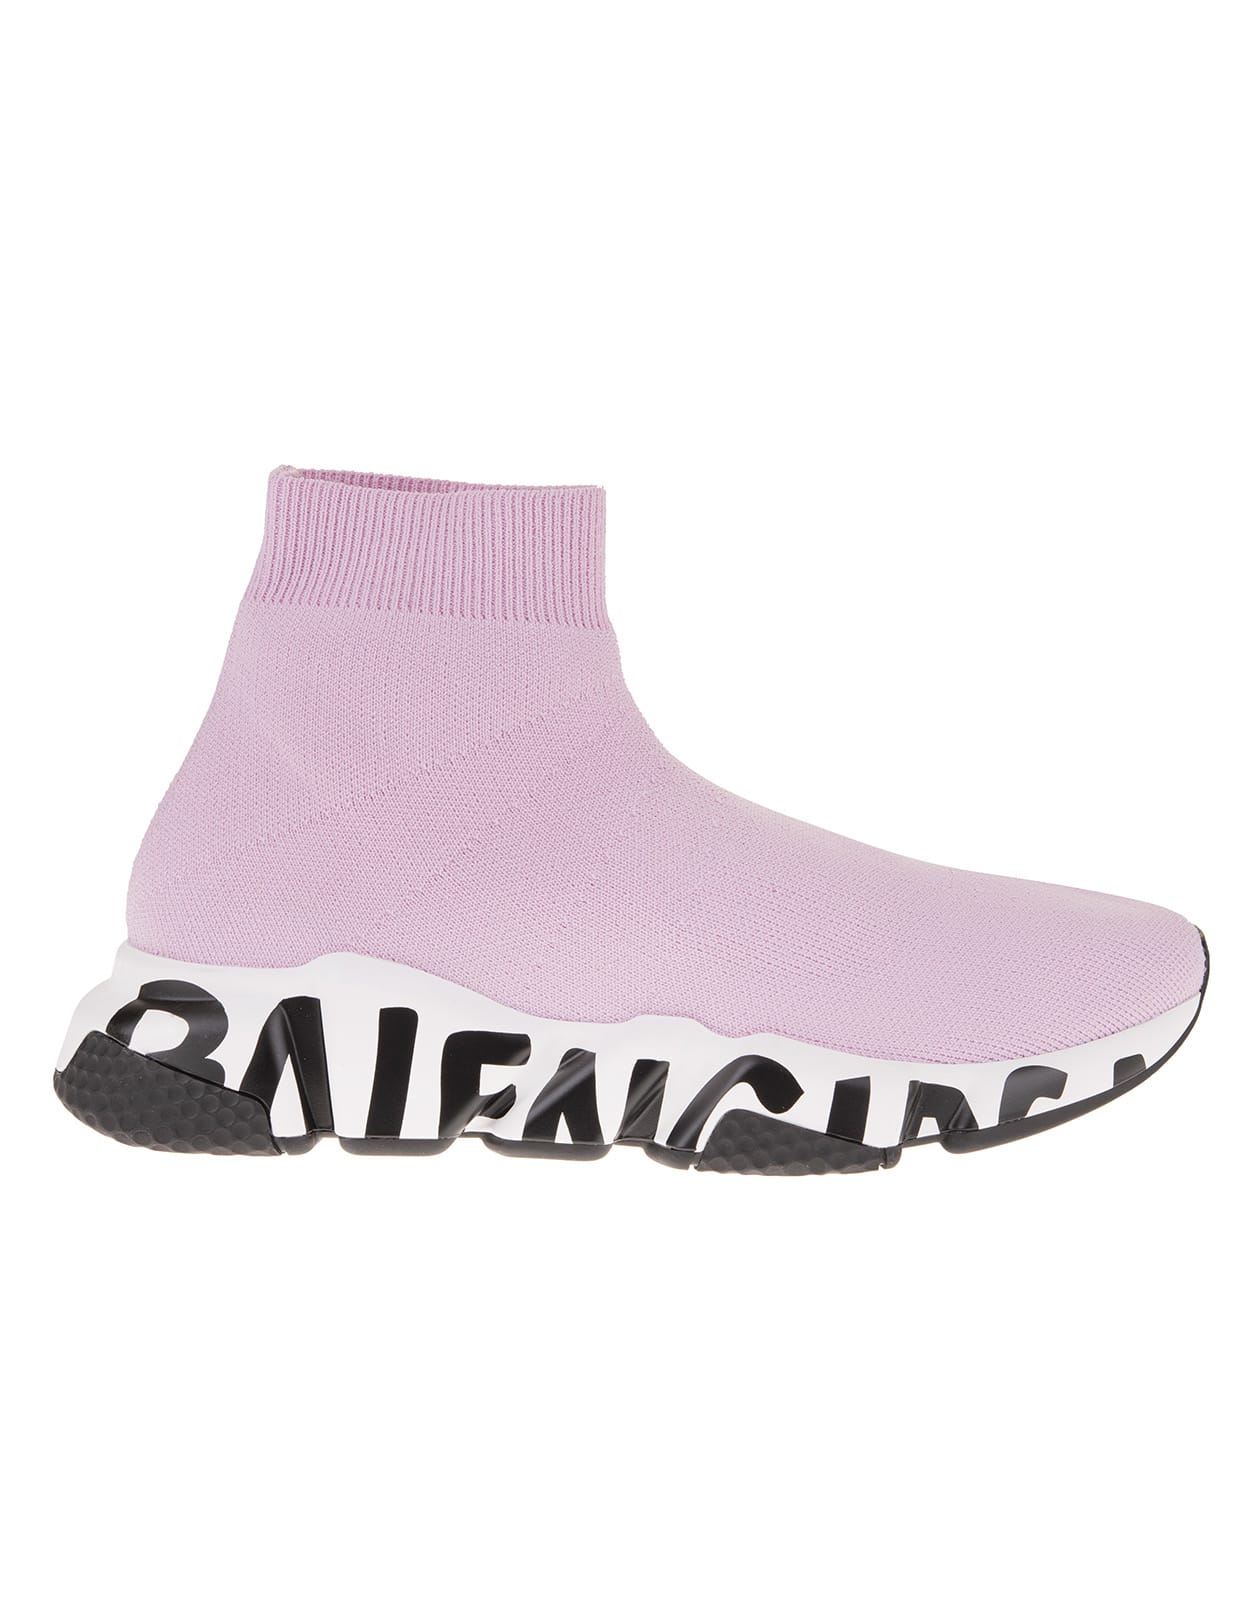 Buy Balenciaga Woman Pink And White Speed Graffiti Sneakers online, shop Balenciaga shoes with free shipping